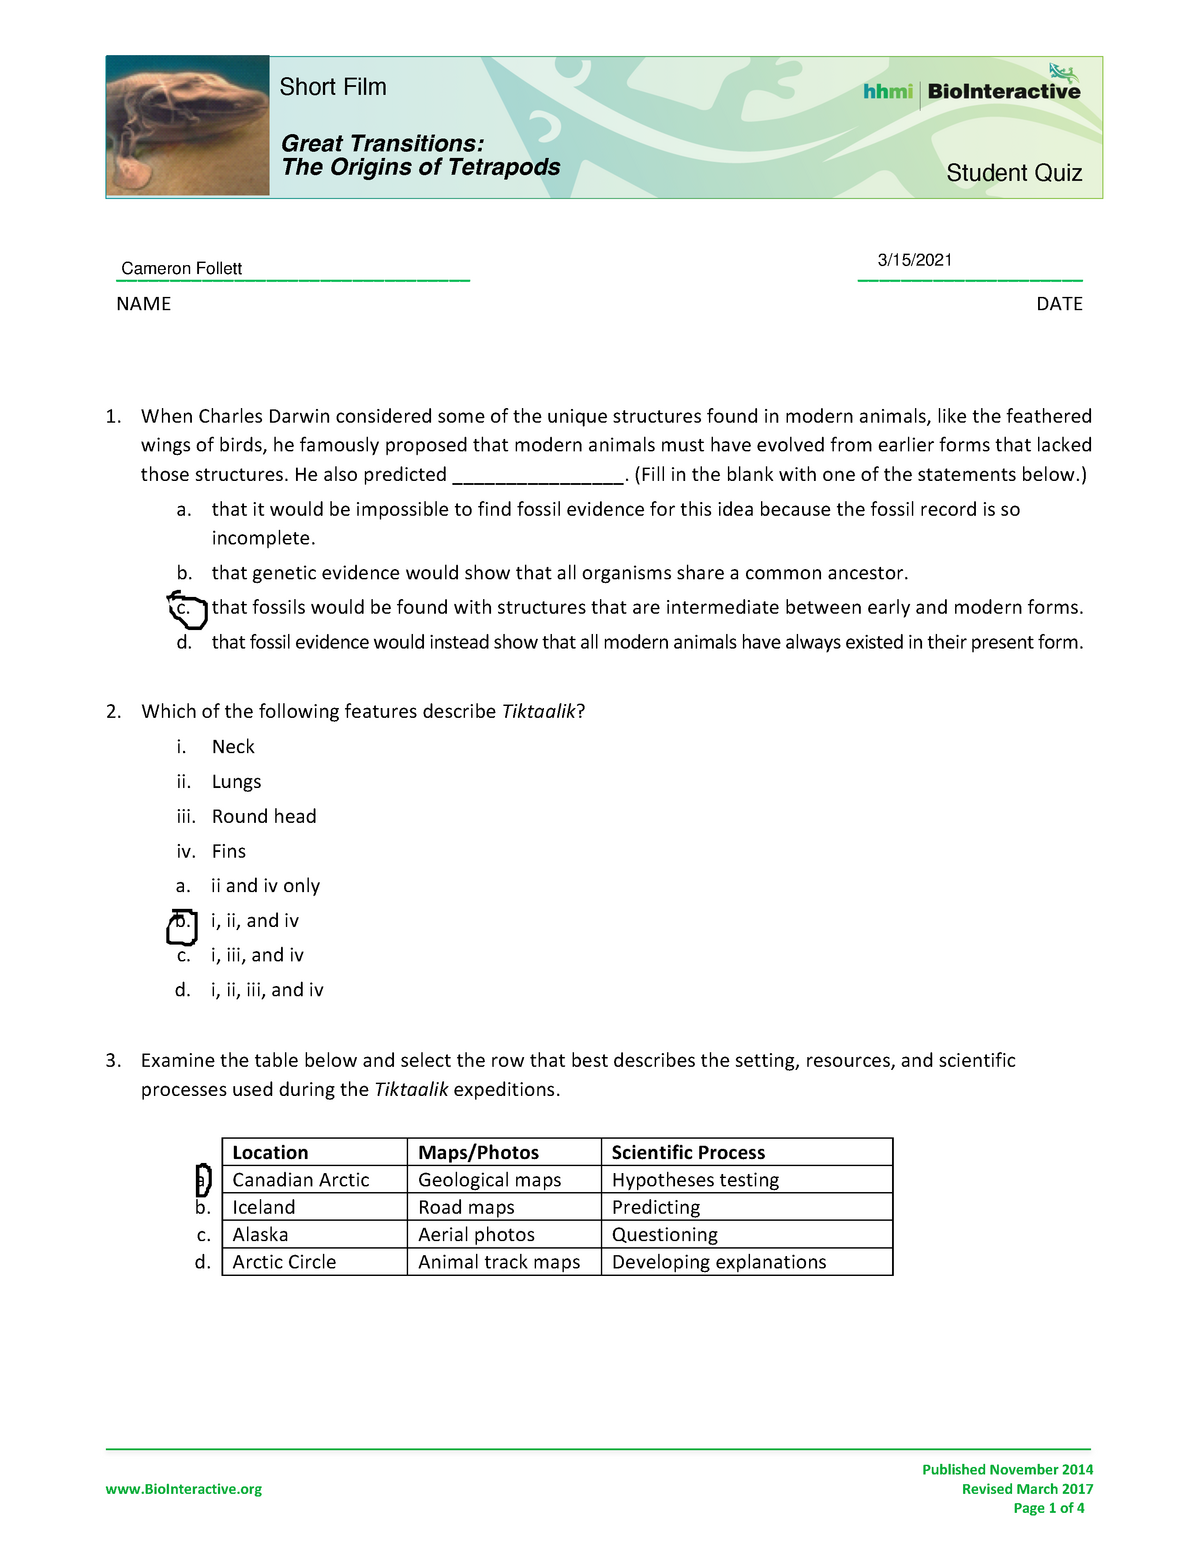 great-transitions-the-origin-of-tetrapods-student-worksheet-answers-marcuskruwlarson